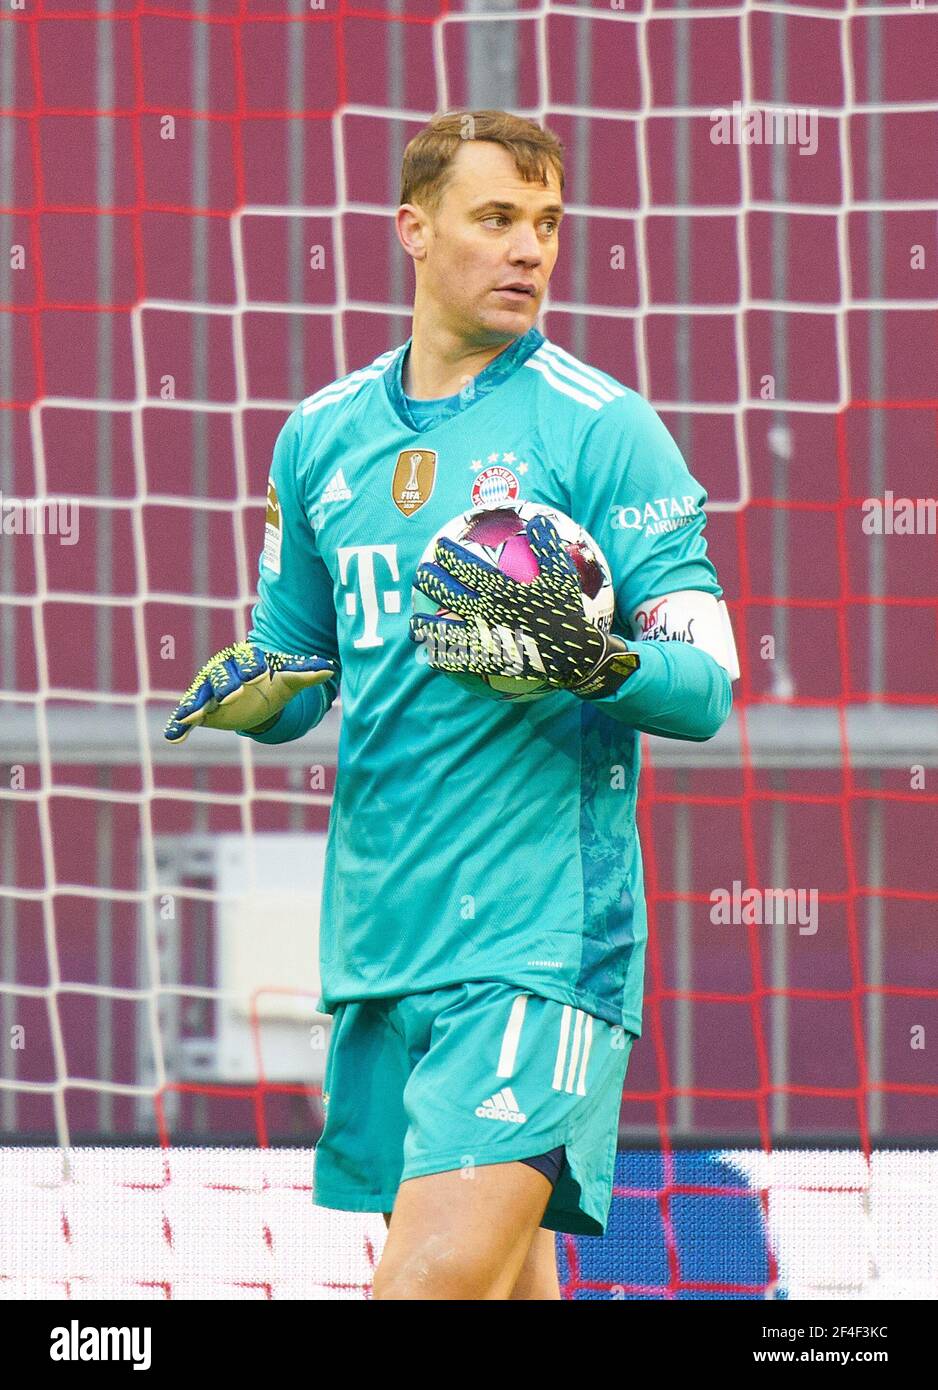 Vfb stuttgart goalkeeper hi-res stock photography and images - Page 4 -  Alamy